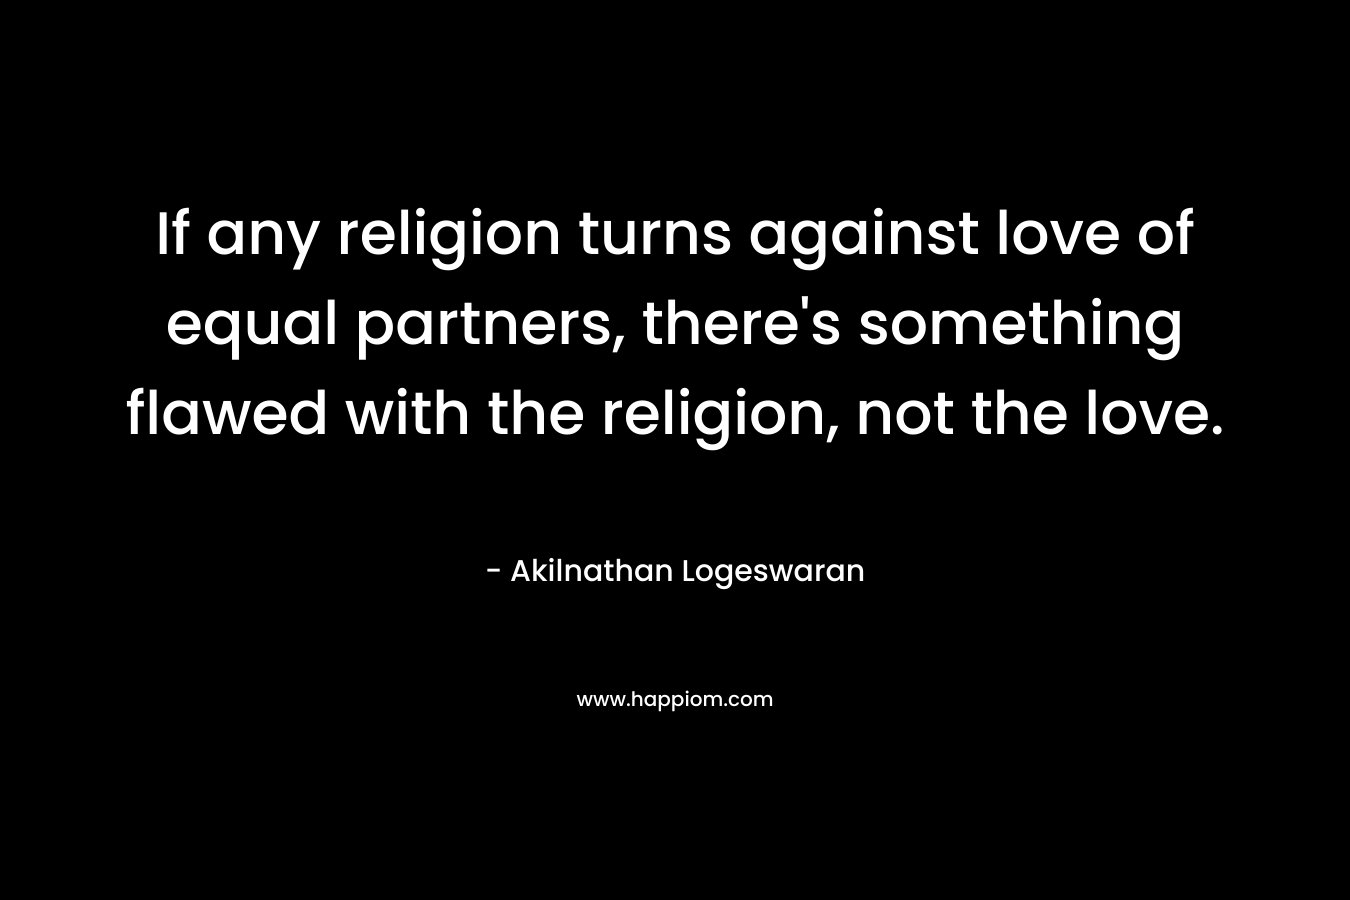 If any religion turns against love of equal partners, there’s something flawed with the religion, not the love. – Akilnathan Logeswaran